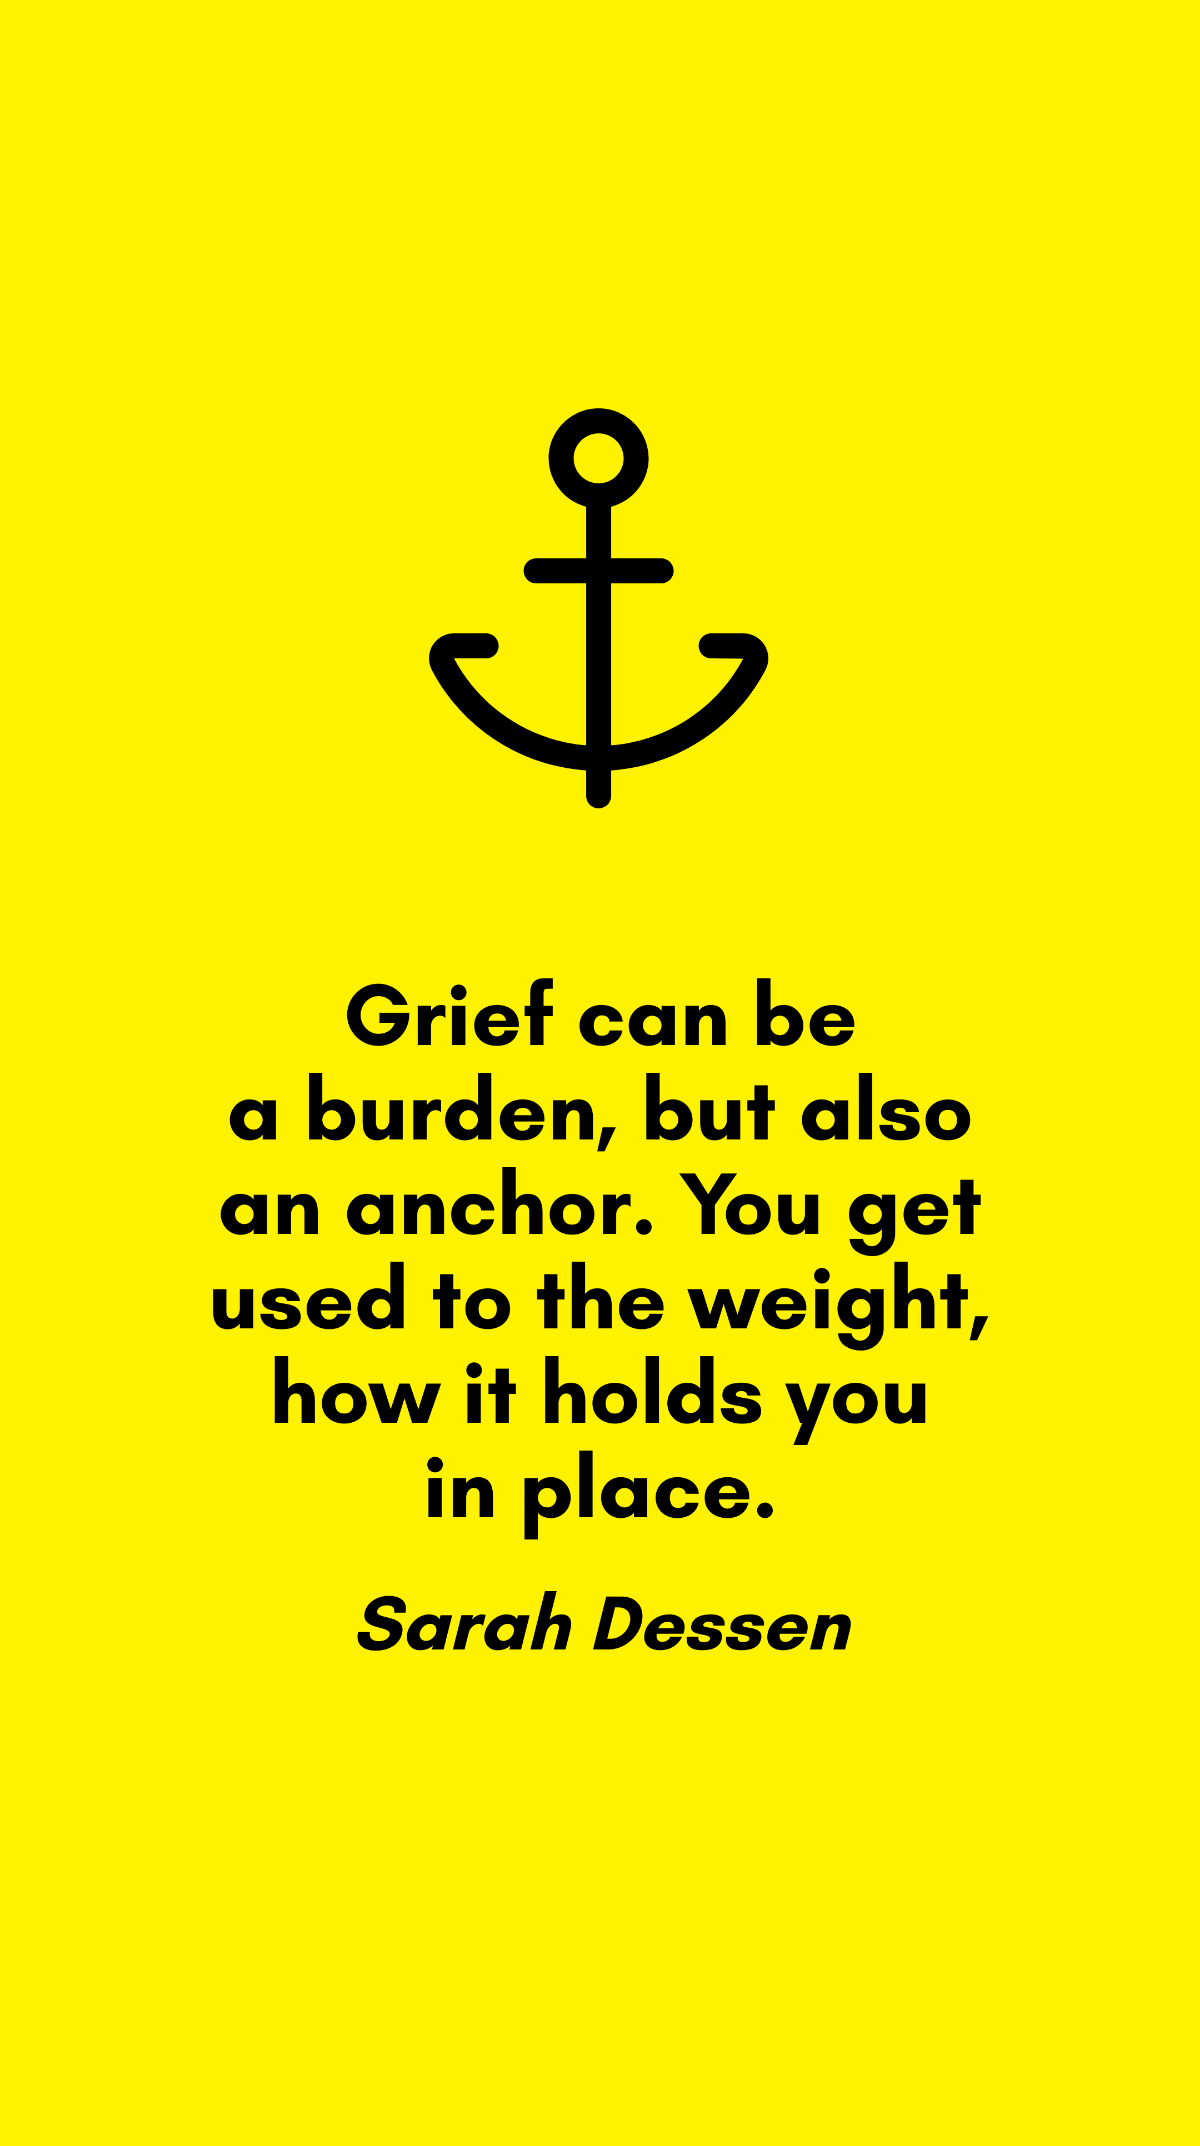 Sarah Dessen - Grief can be a burden, but also an anchor. You get used to the weight, how it holds you in place. Template